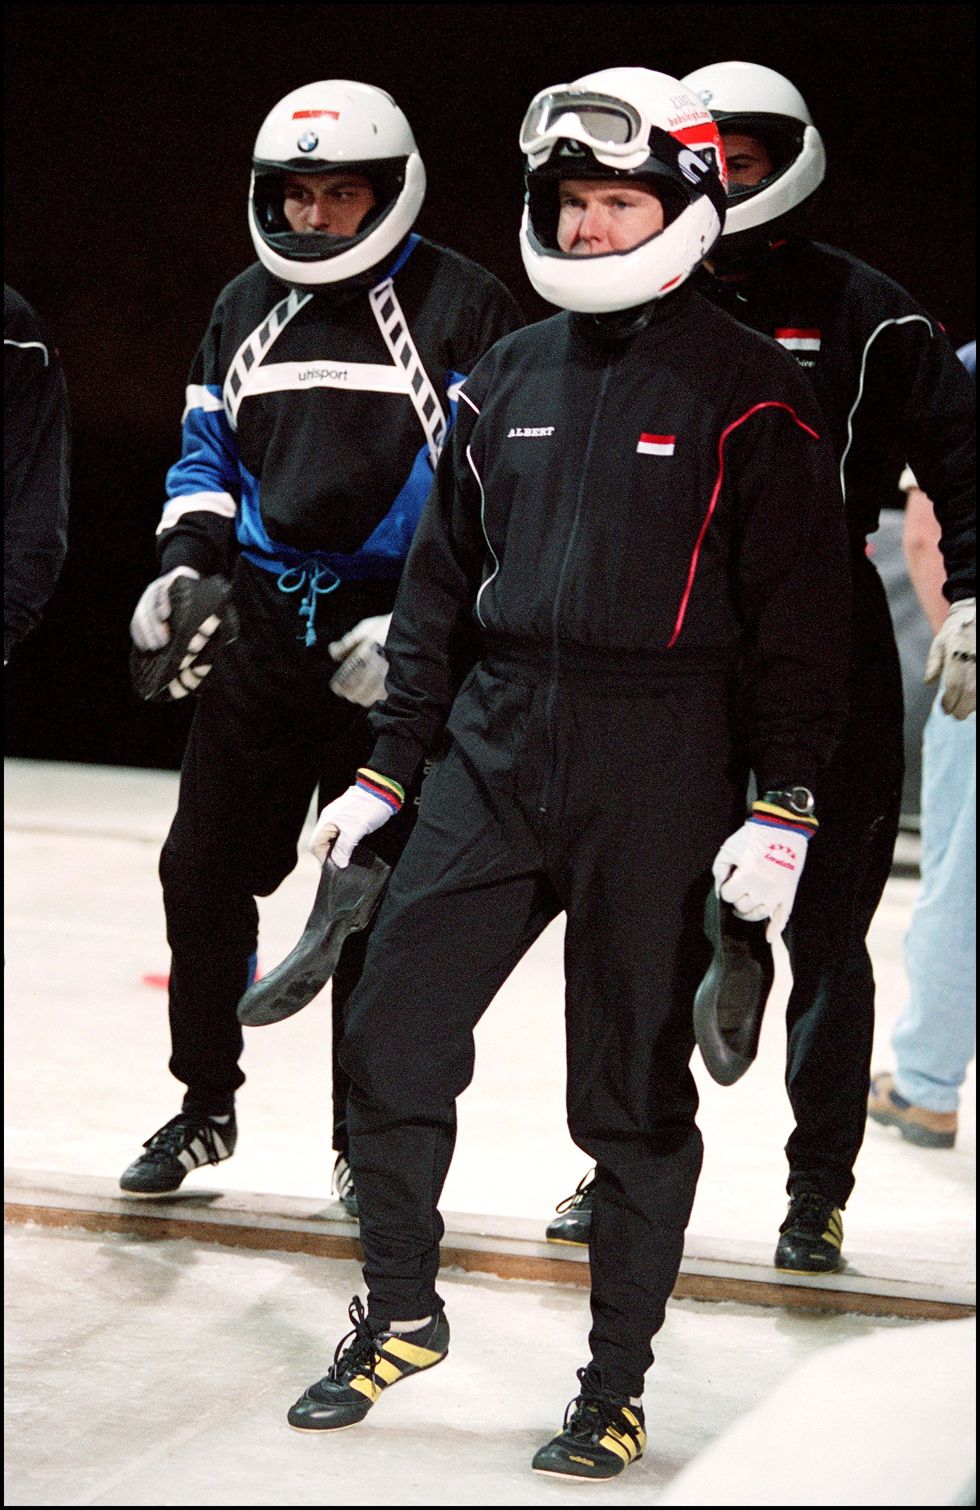 prince albert of monaco last training session on the olympic bobsleigh track before the winter olympic games in salt lake city, united states on october 21, 2001